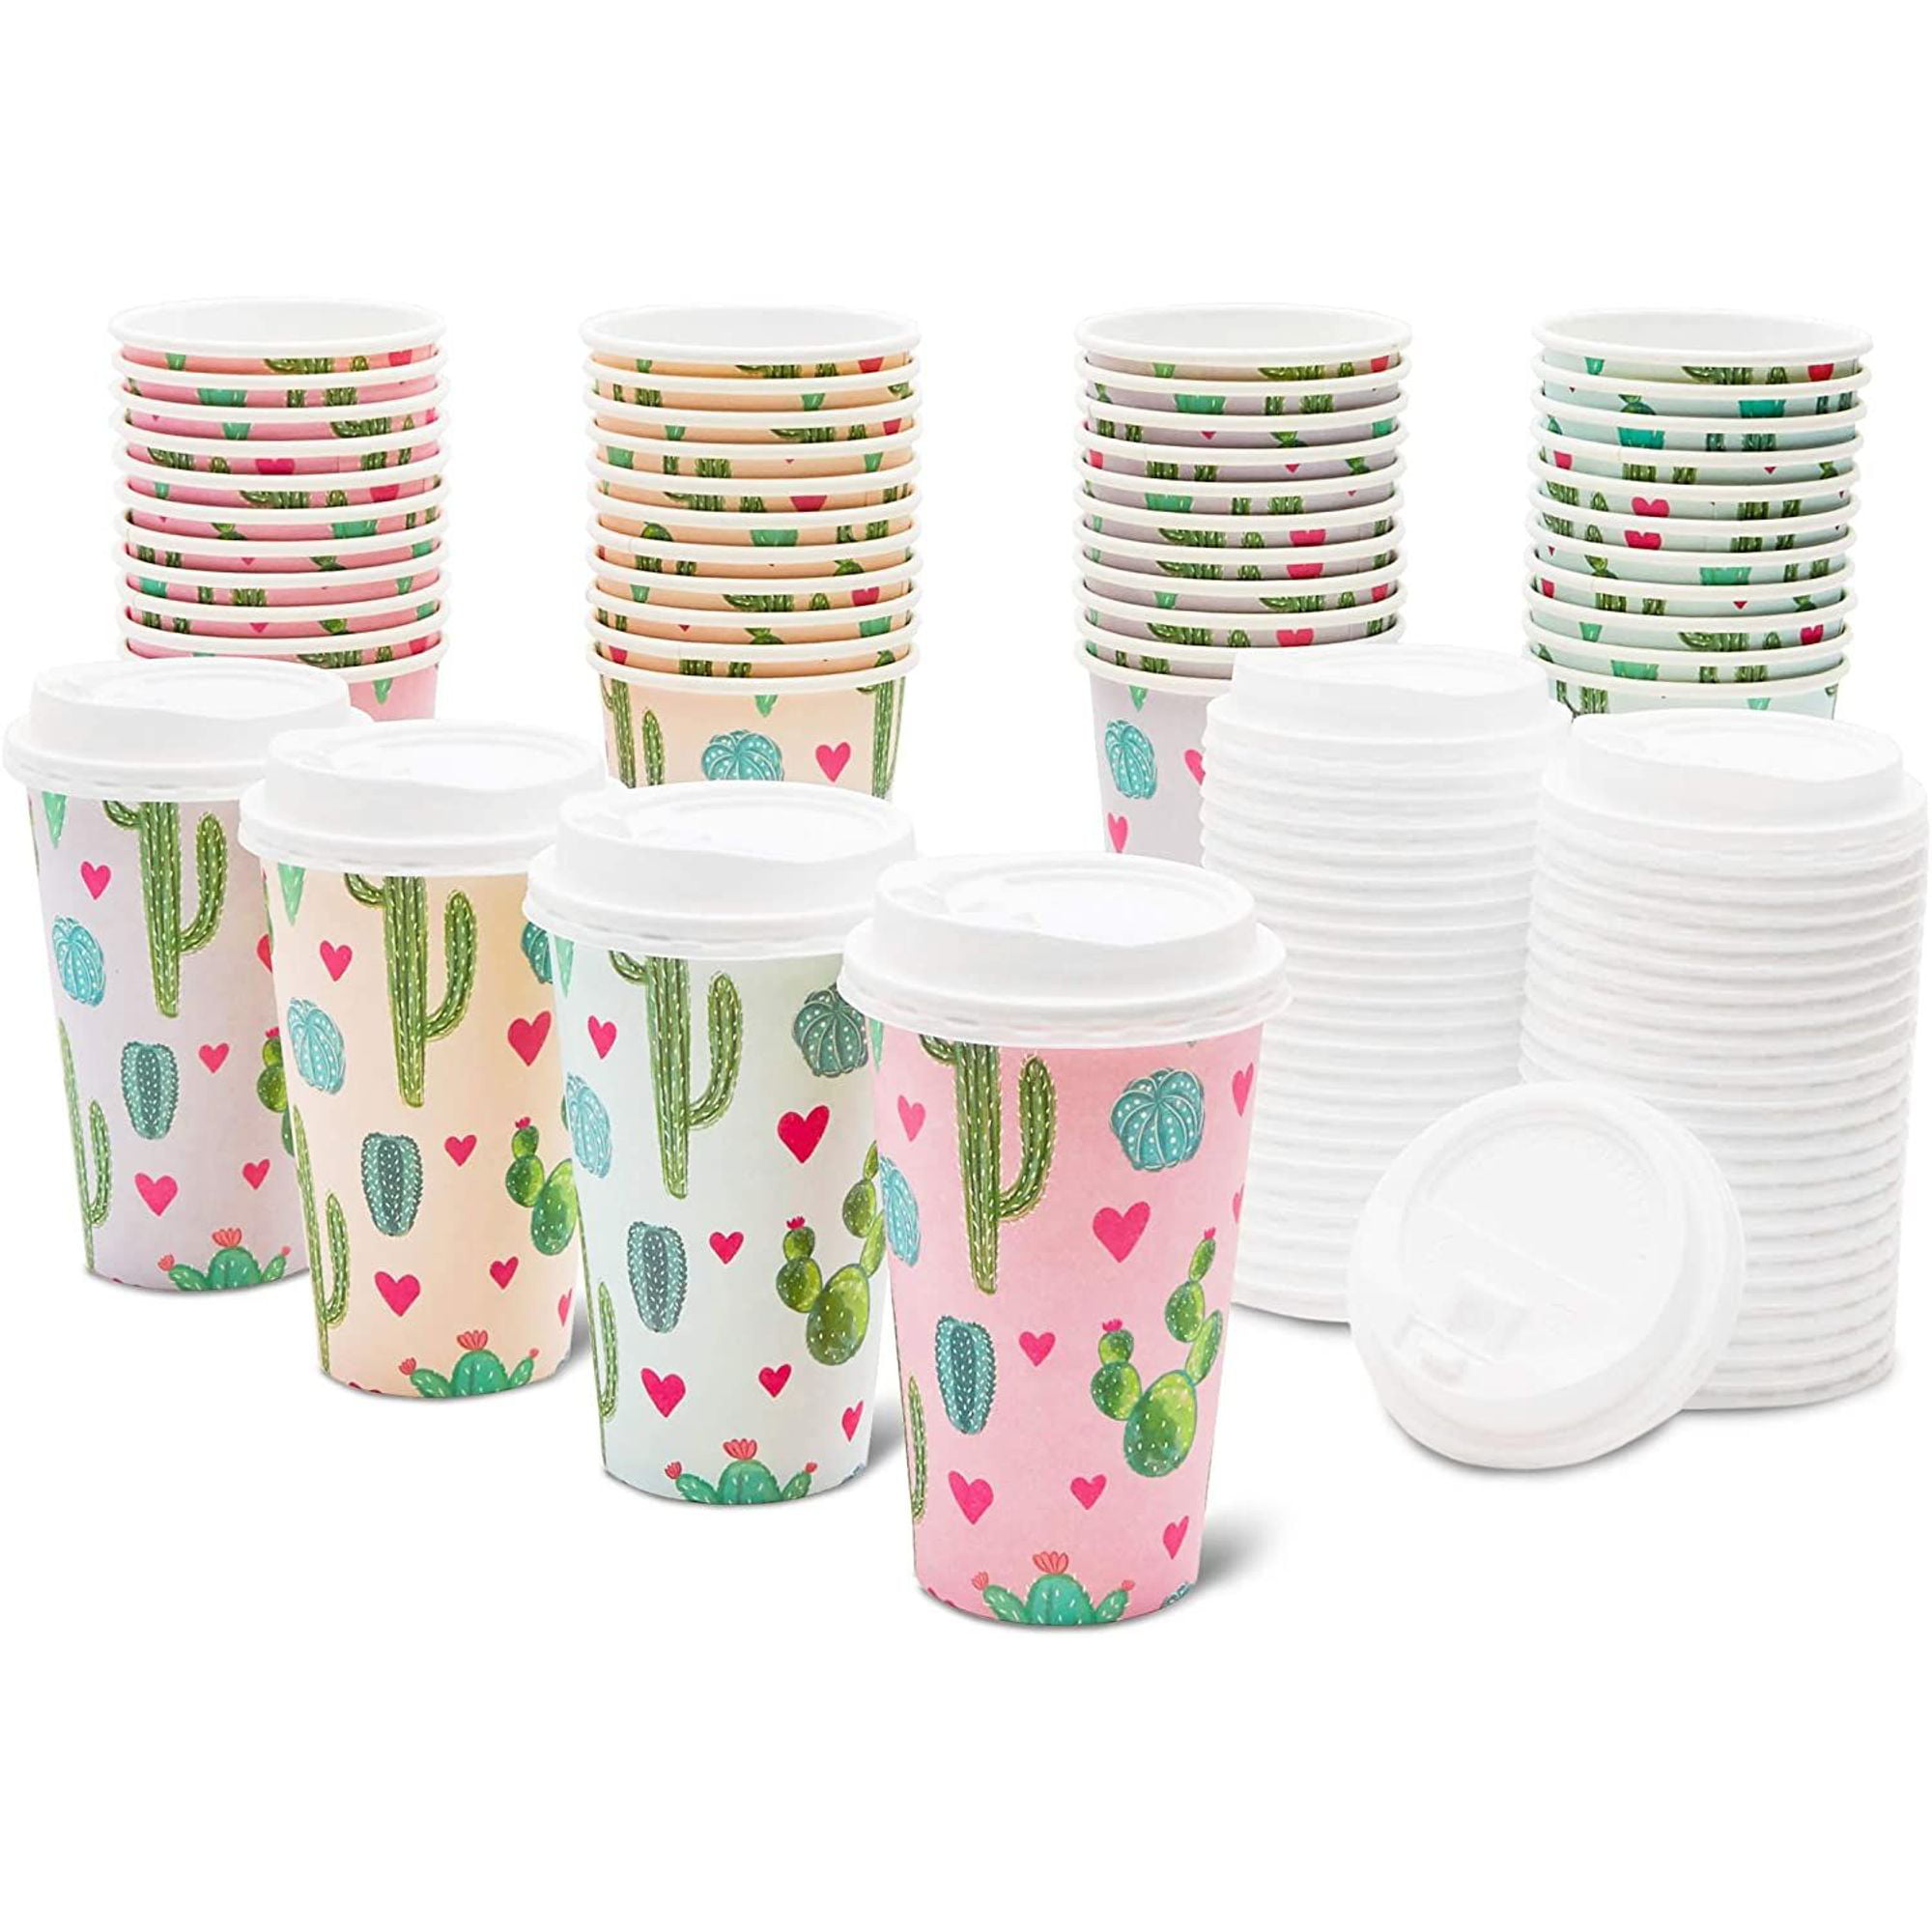 Hot White Paper Coffee Cups with Lids 16oz - 100 Set Disposable Paper Cups 